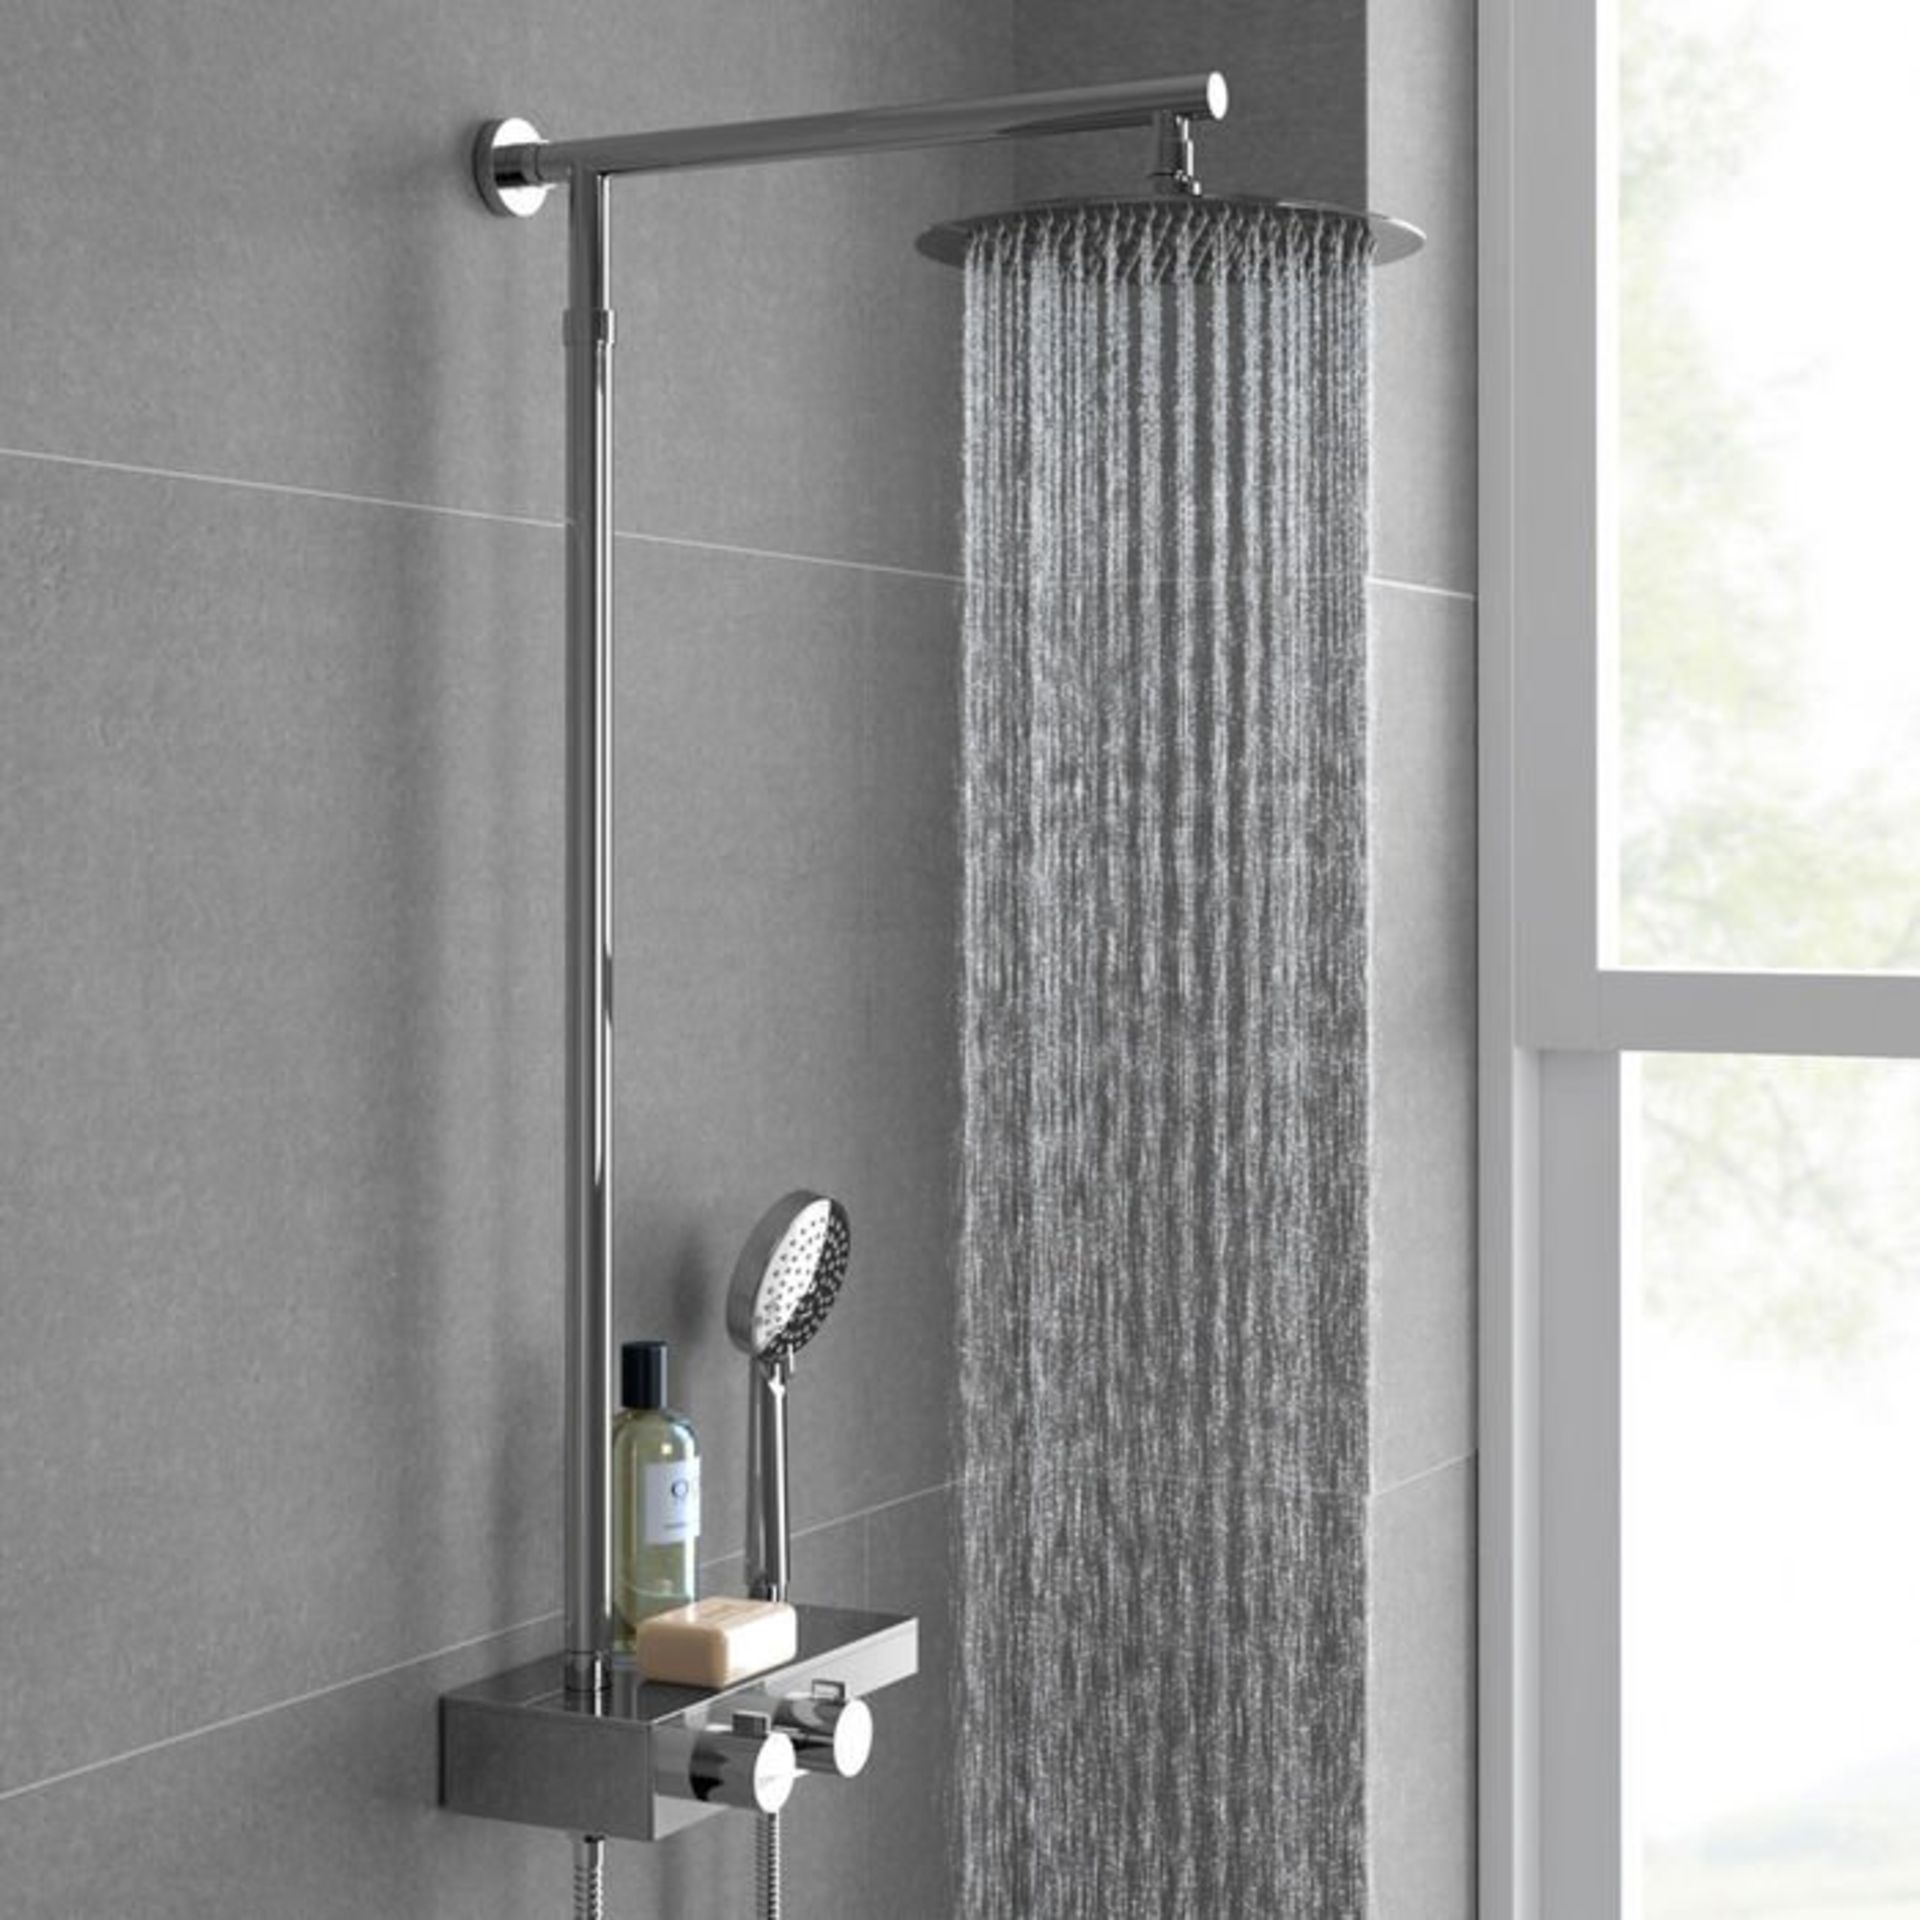 (Y8) Round Exposed Thermostatic Mixer Shower Kit Large Head. Cool to touch shower for additional